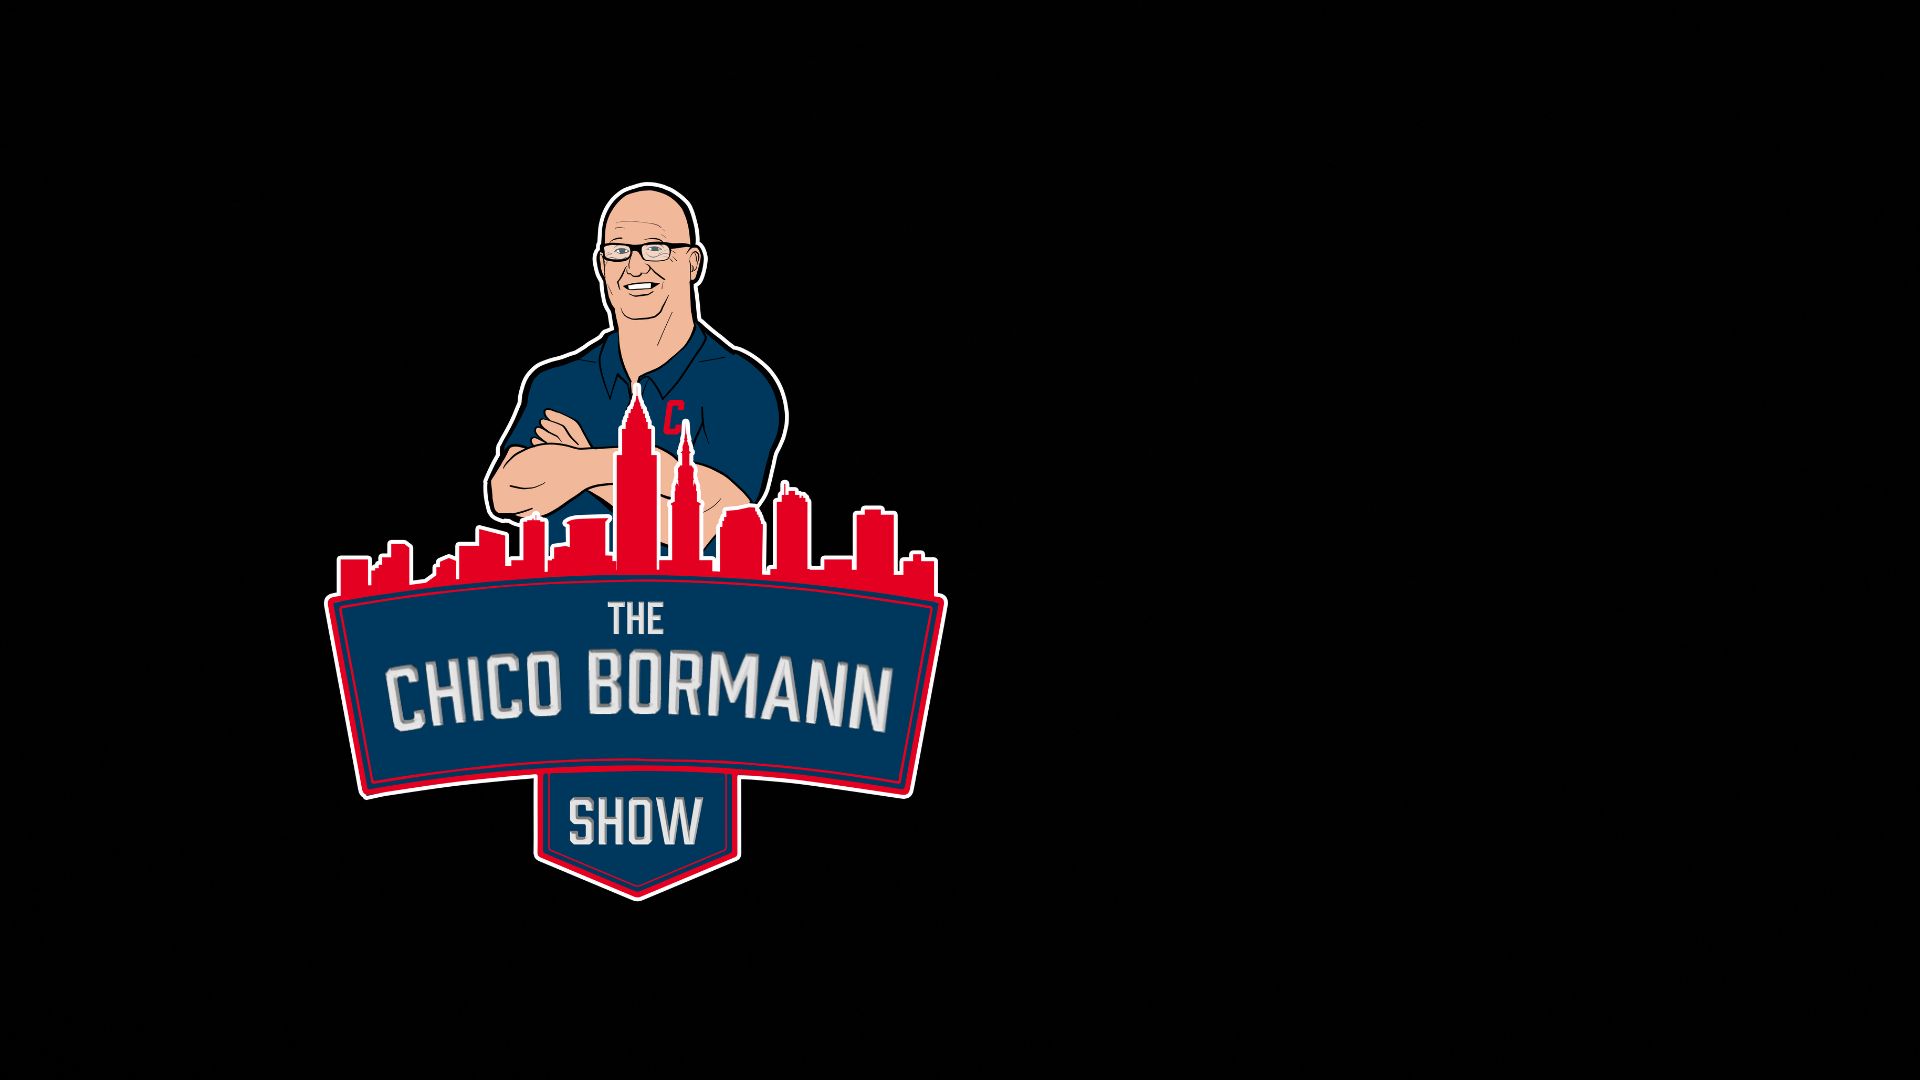 Art for The Chico Bormann Show by BIGPLAY